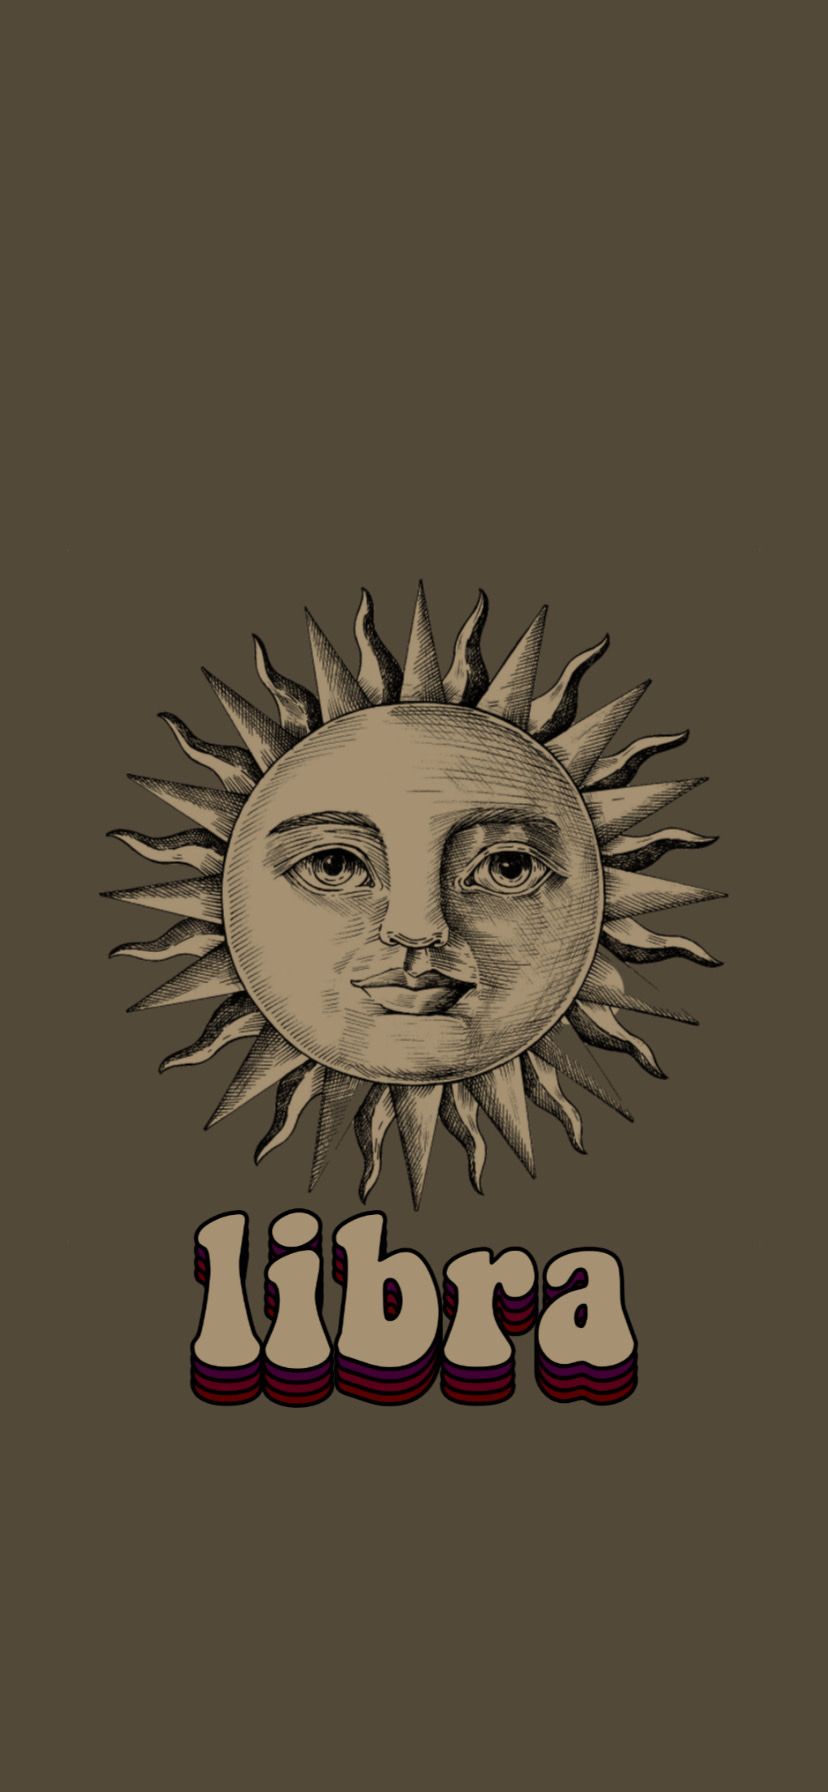 A poster for the sign of libra - Libra